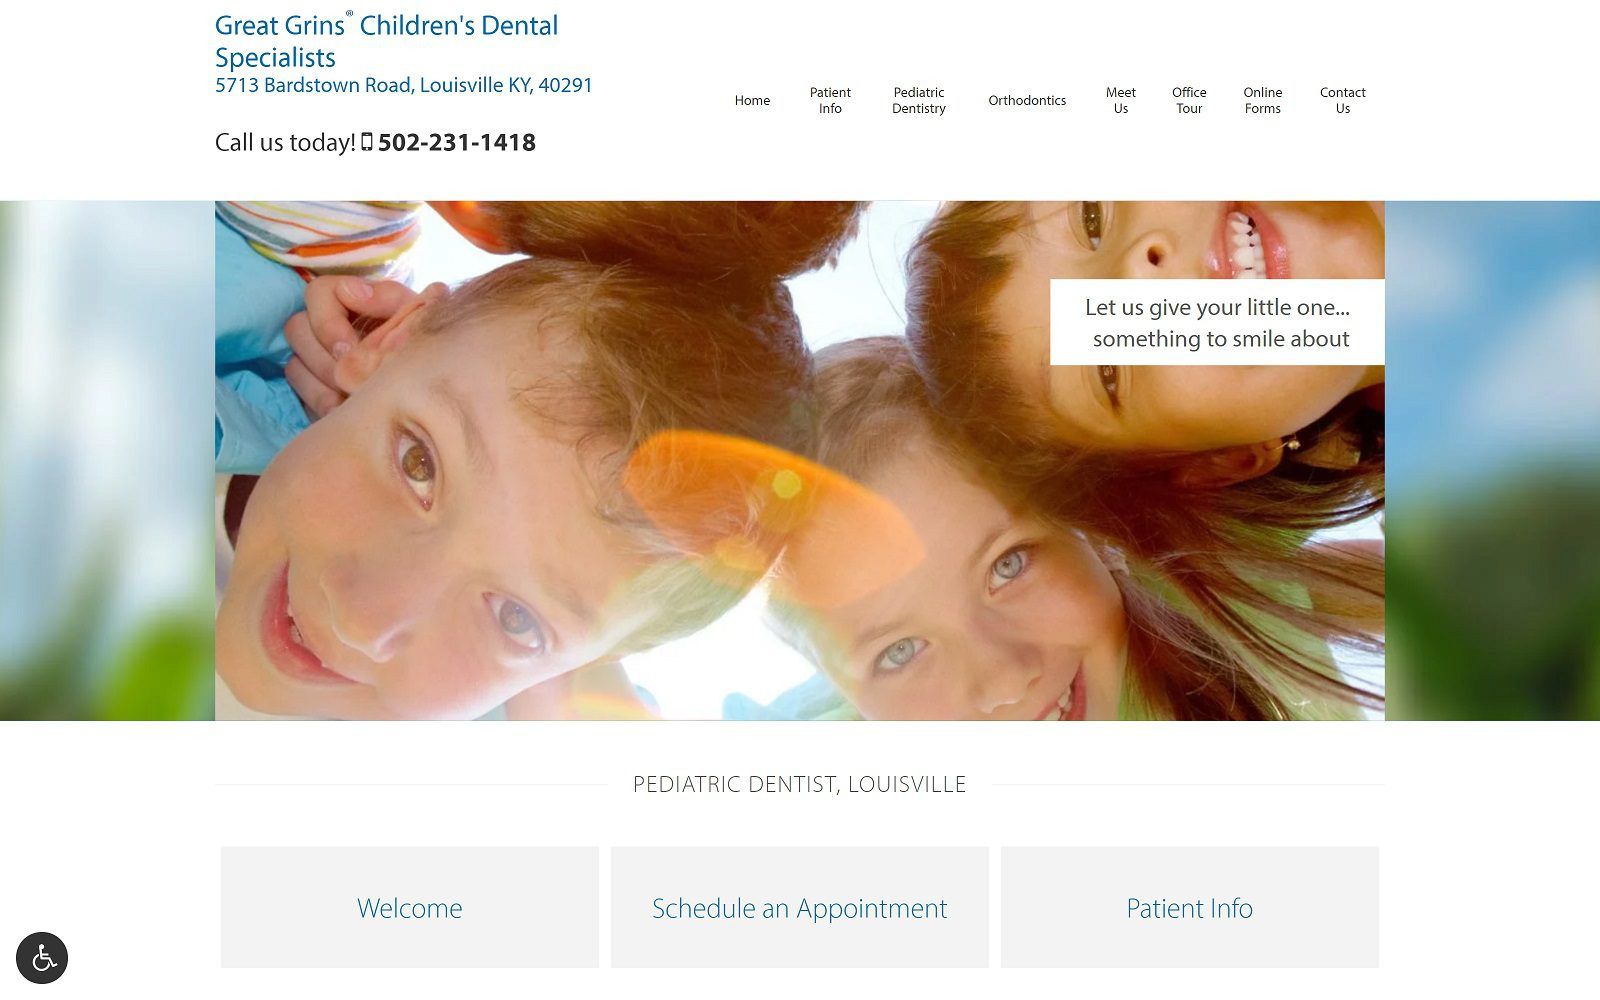 The screenshot of great grins children's dental specialists: keith l. Ray, dmd website